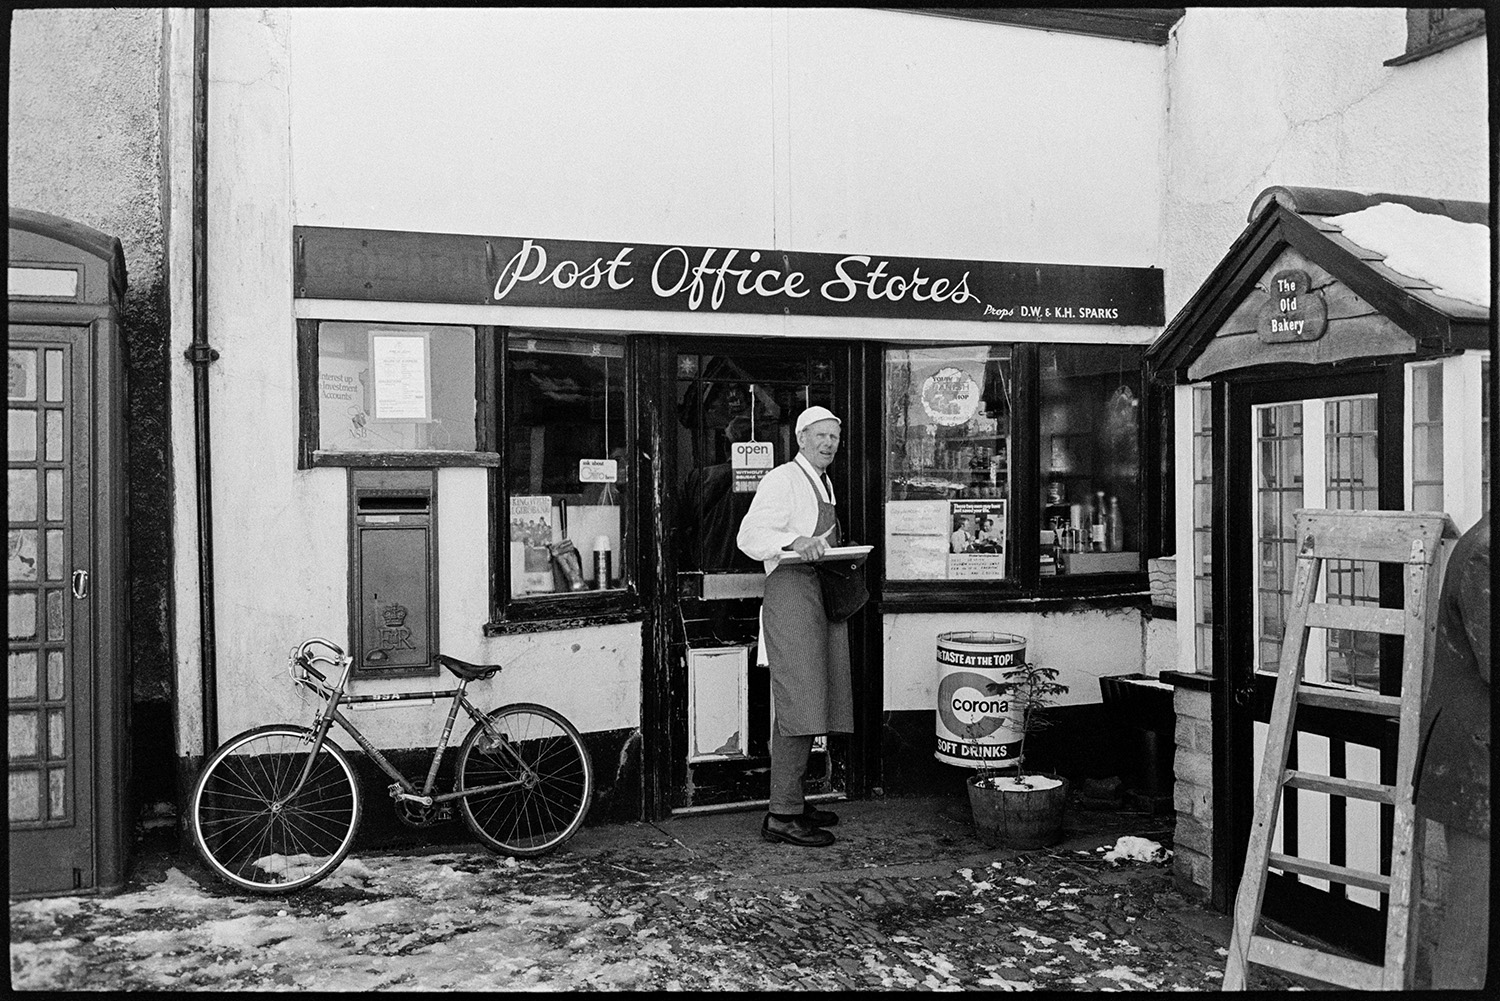 Snow, Butcher delivering meat to Post Office from van. 
[A butcher from F L Lake & Sons Ltd outside the Post Office in Coldridge, after delivering meat to the shop. A bicycle is lent against the shop front, under the post box , and a telephone box is next to the store. Snow can also be seen on the cobbles in front of the shop.]